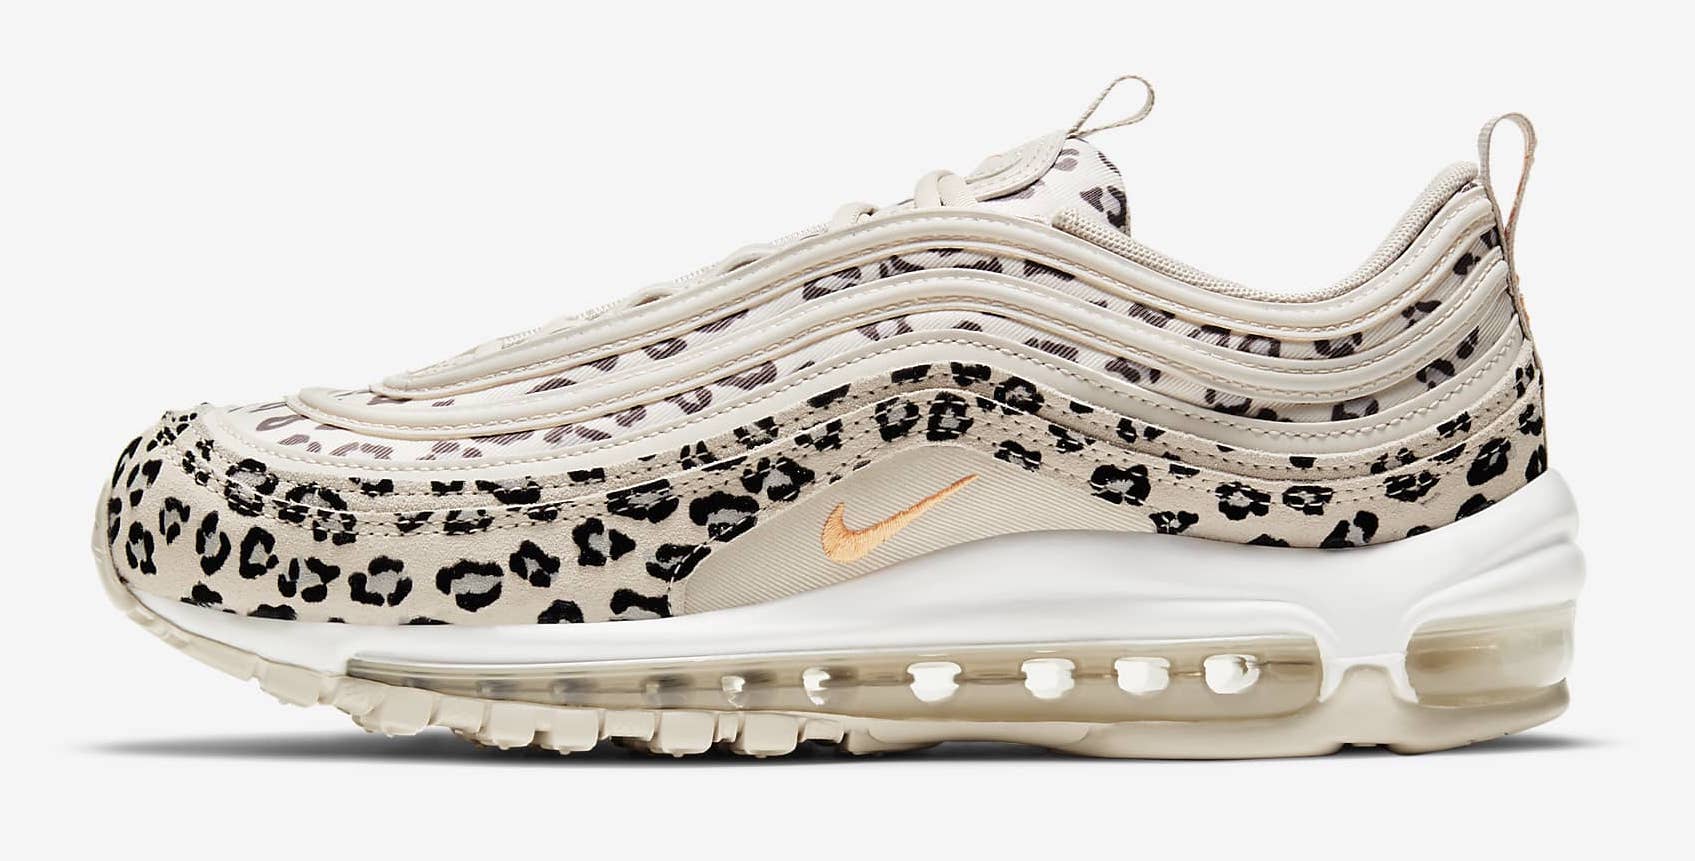 Nike, Nordstrom have sweet deals for Air Max Day: Our favorites on sale,  from Air Max 1 to Vapormax, and more 